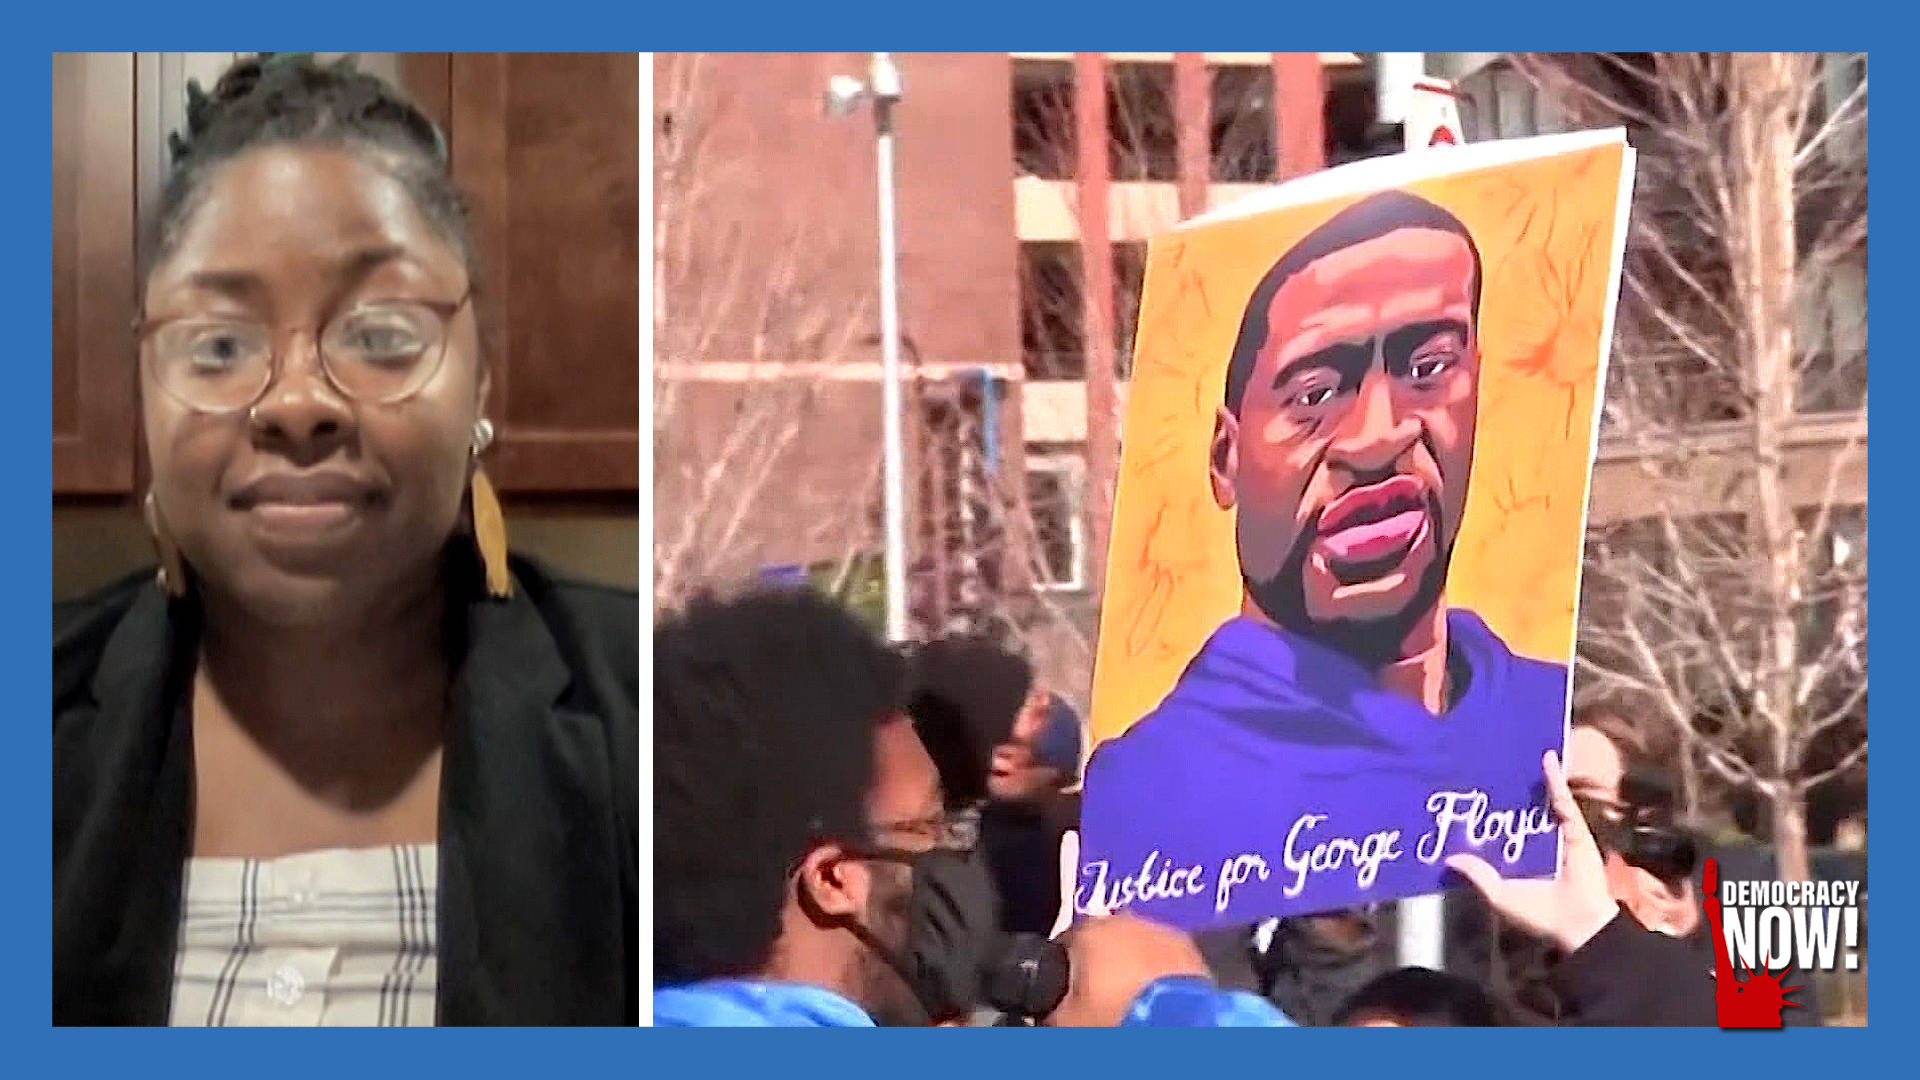 Abolition Struggle Ongoing in Minneapolis 2 Years After Police Killed George Floyd, Spurring Protests